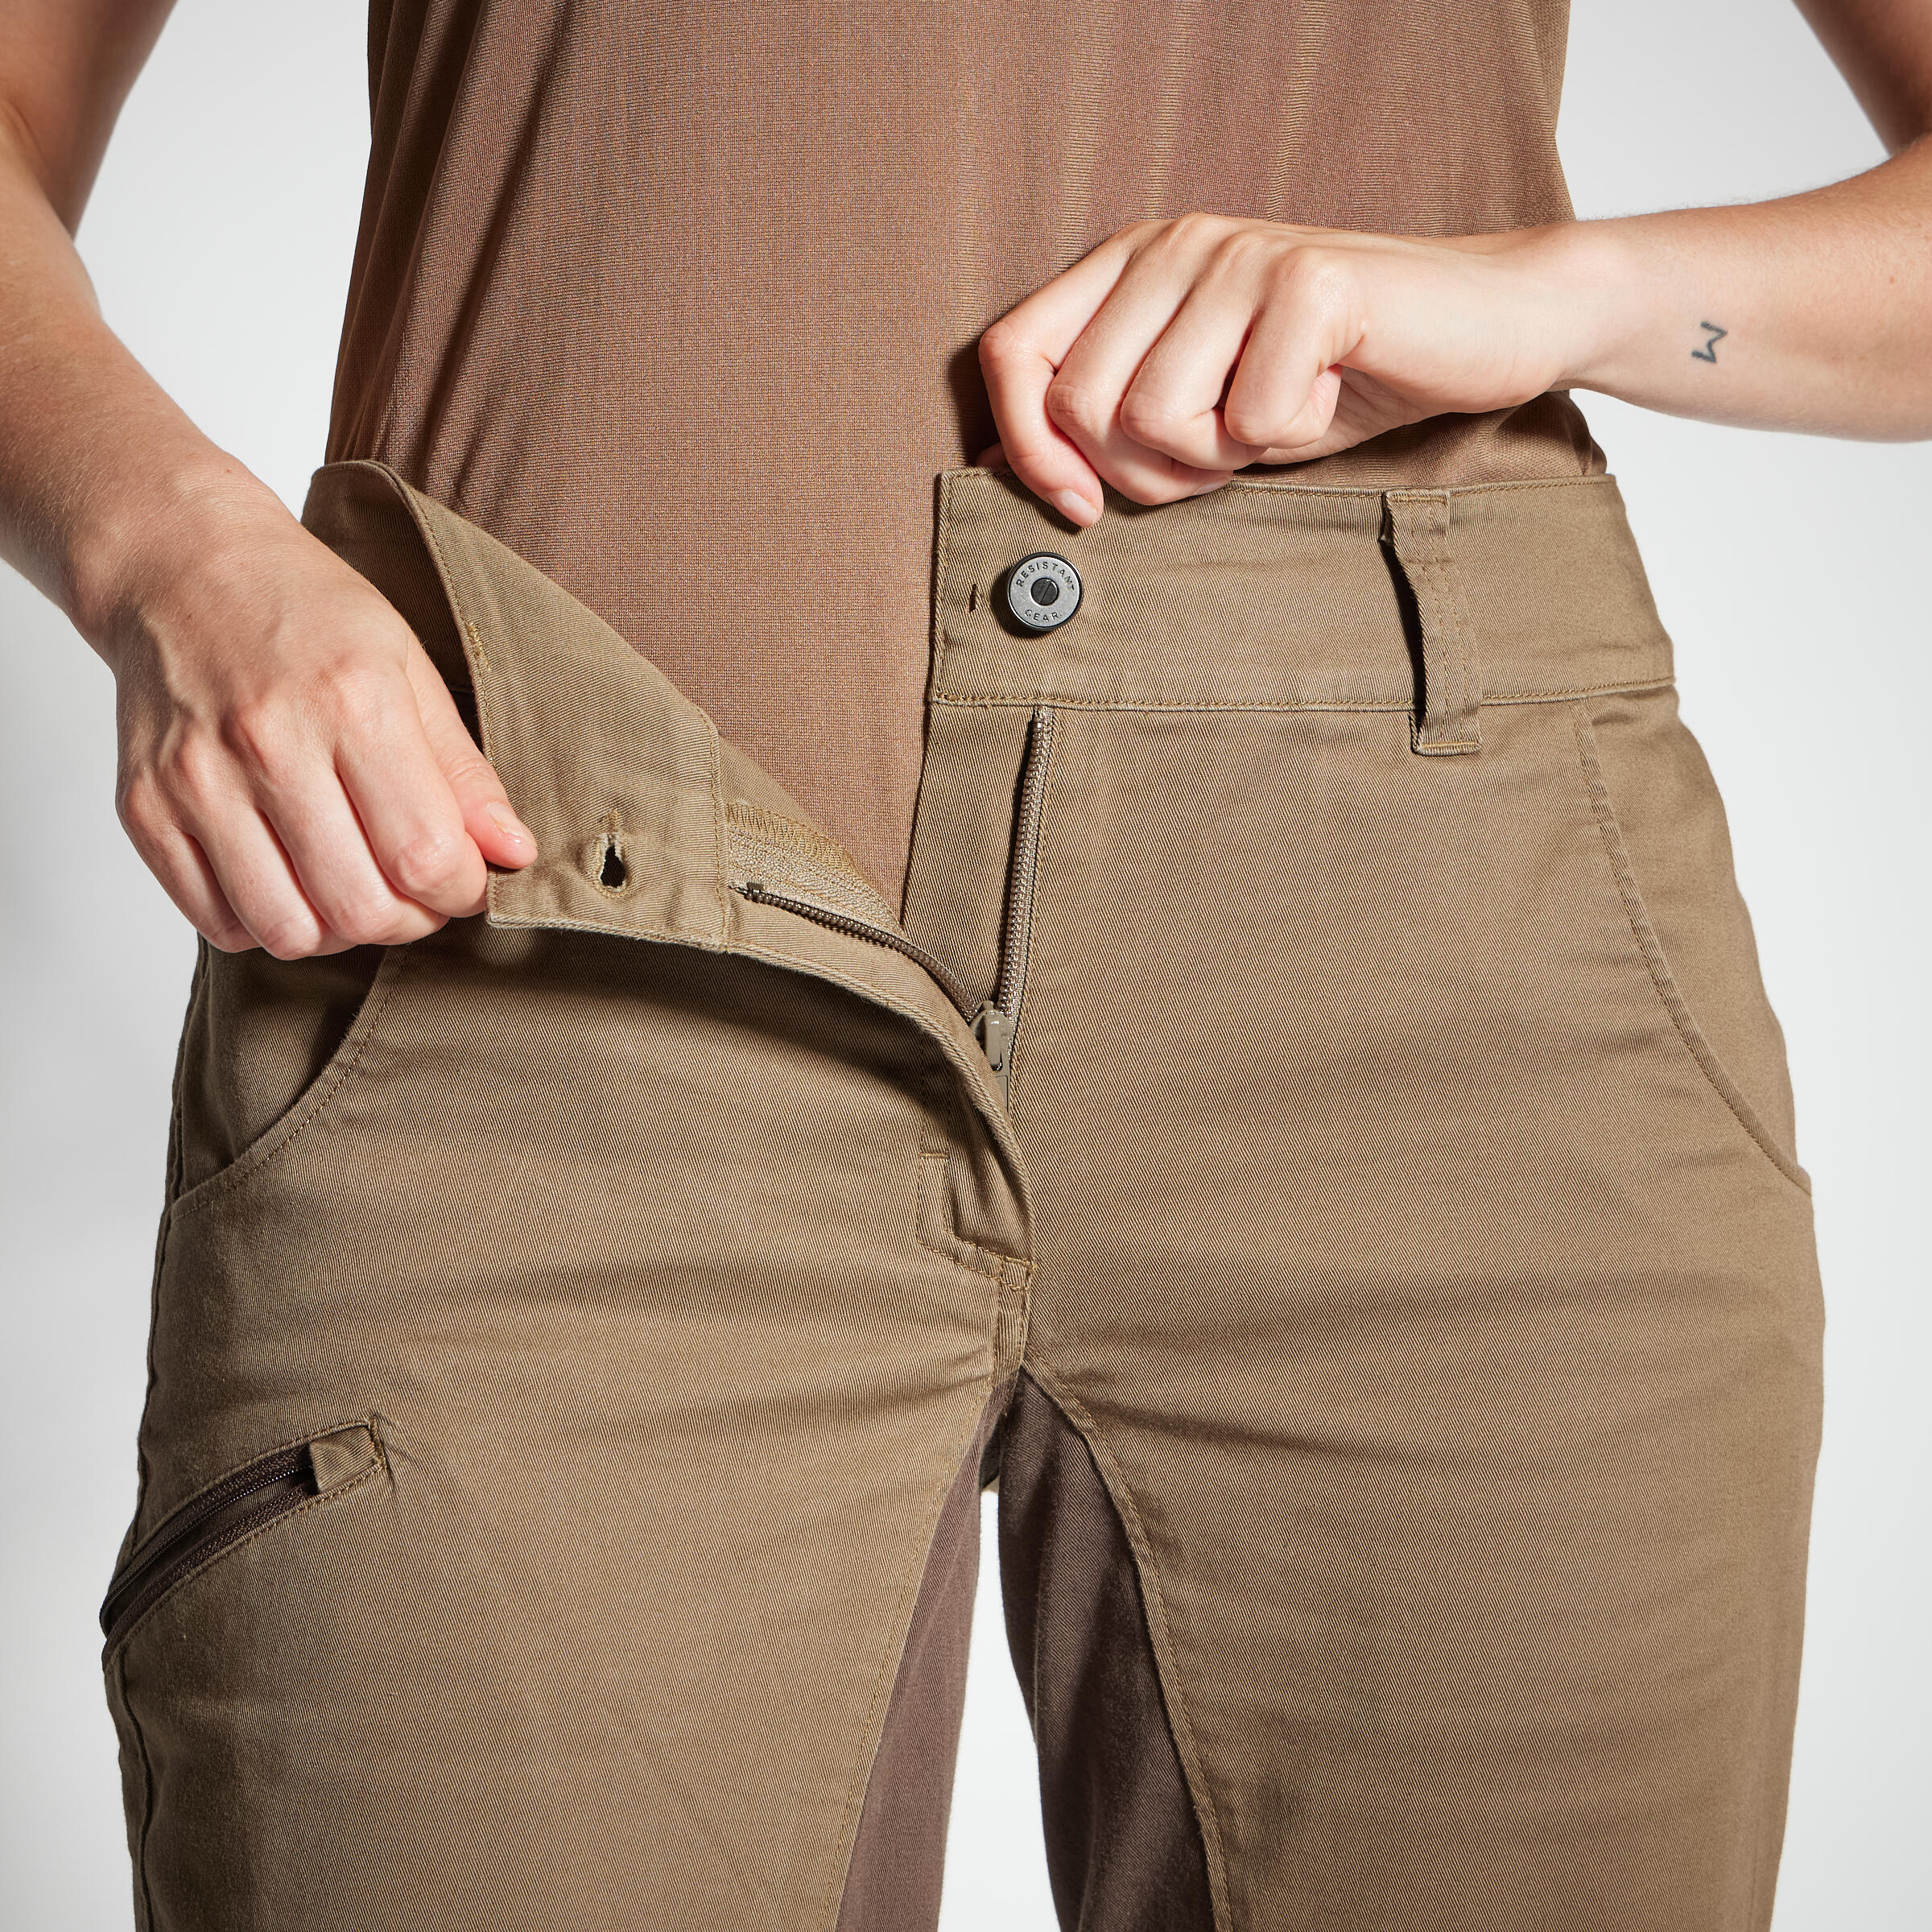 WOMEN'S BREATHABLE HUNTING TROUSERS 500 BROWN 6/8